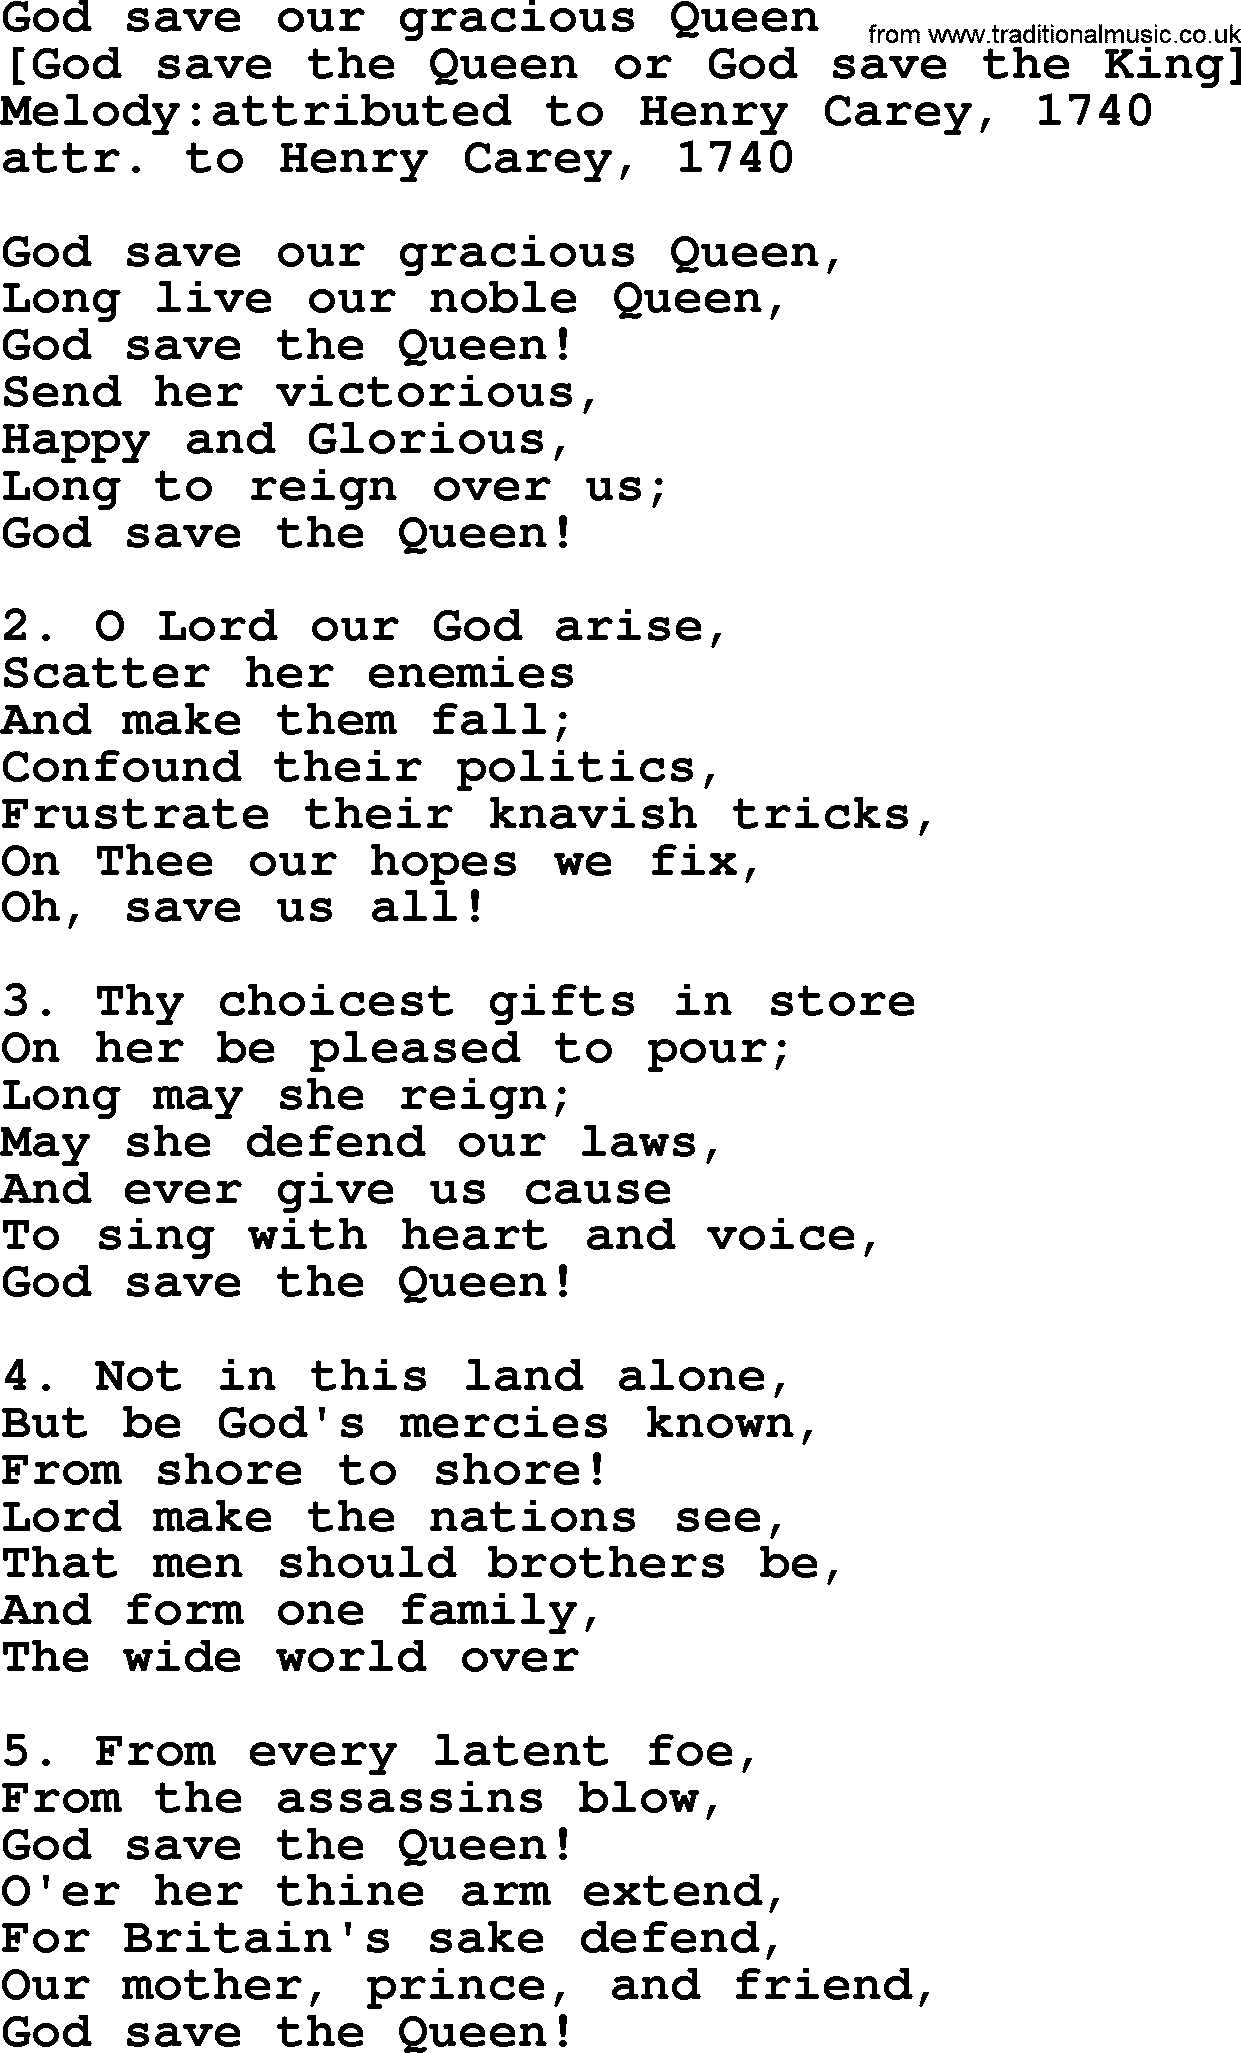 Old English Song: God Save Our Gracious Queen lyrics